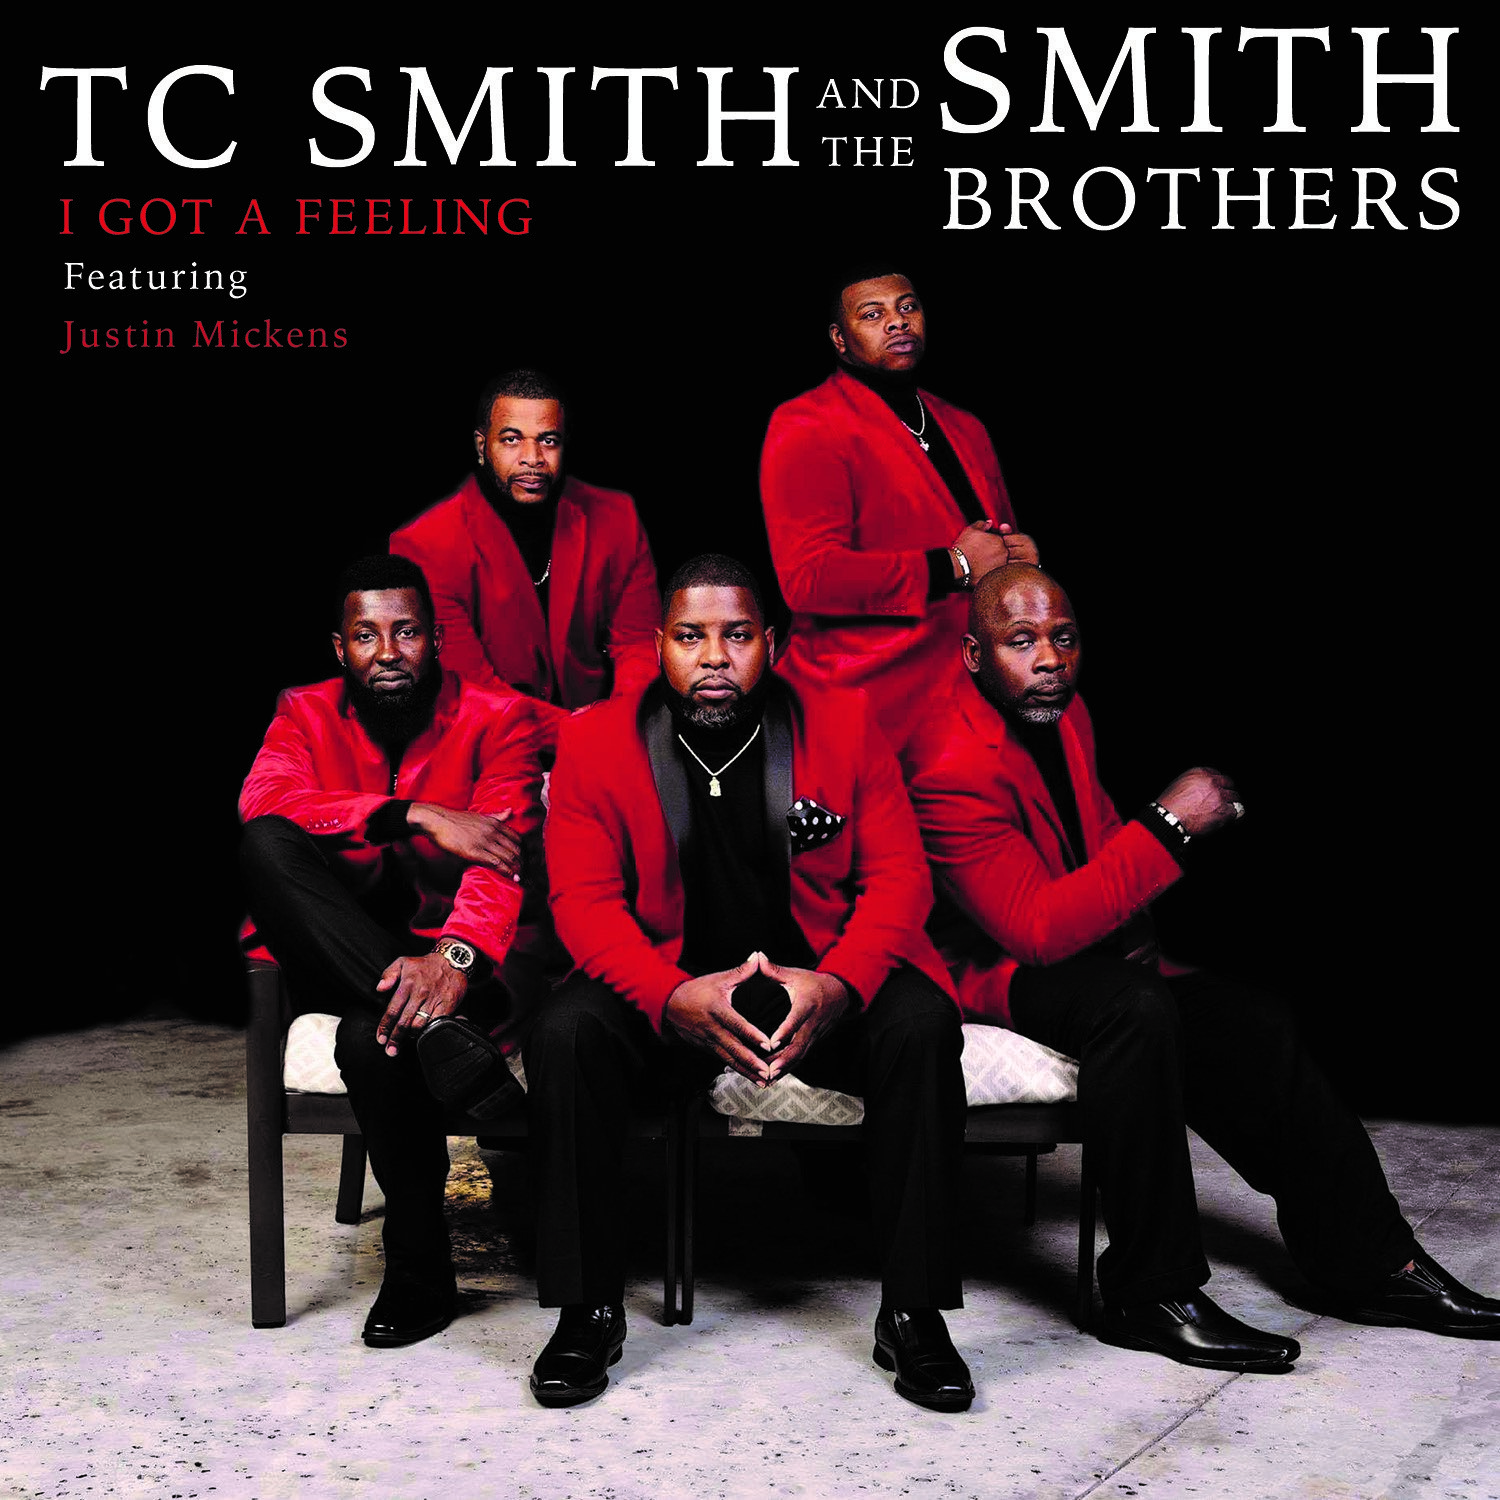 T C Smith And The Smith Brothers - I Got A Feeling (Featuring Justin Mickens)